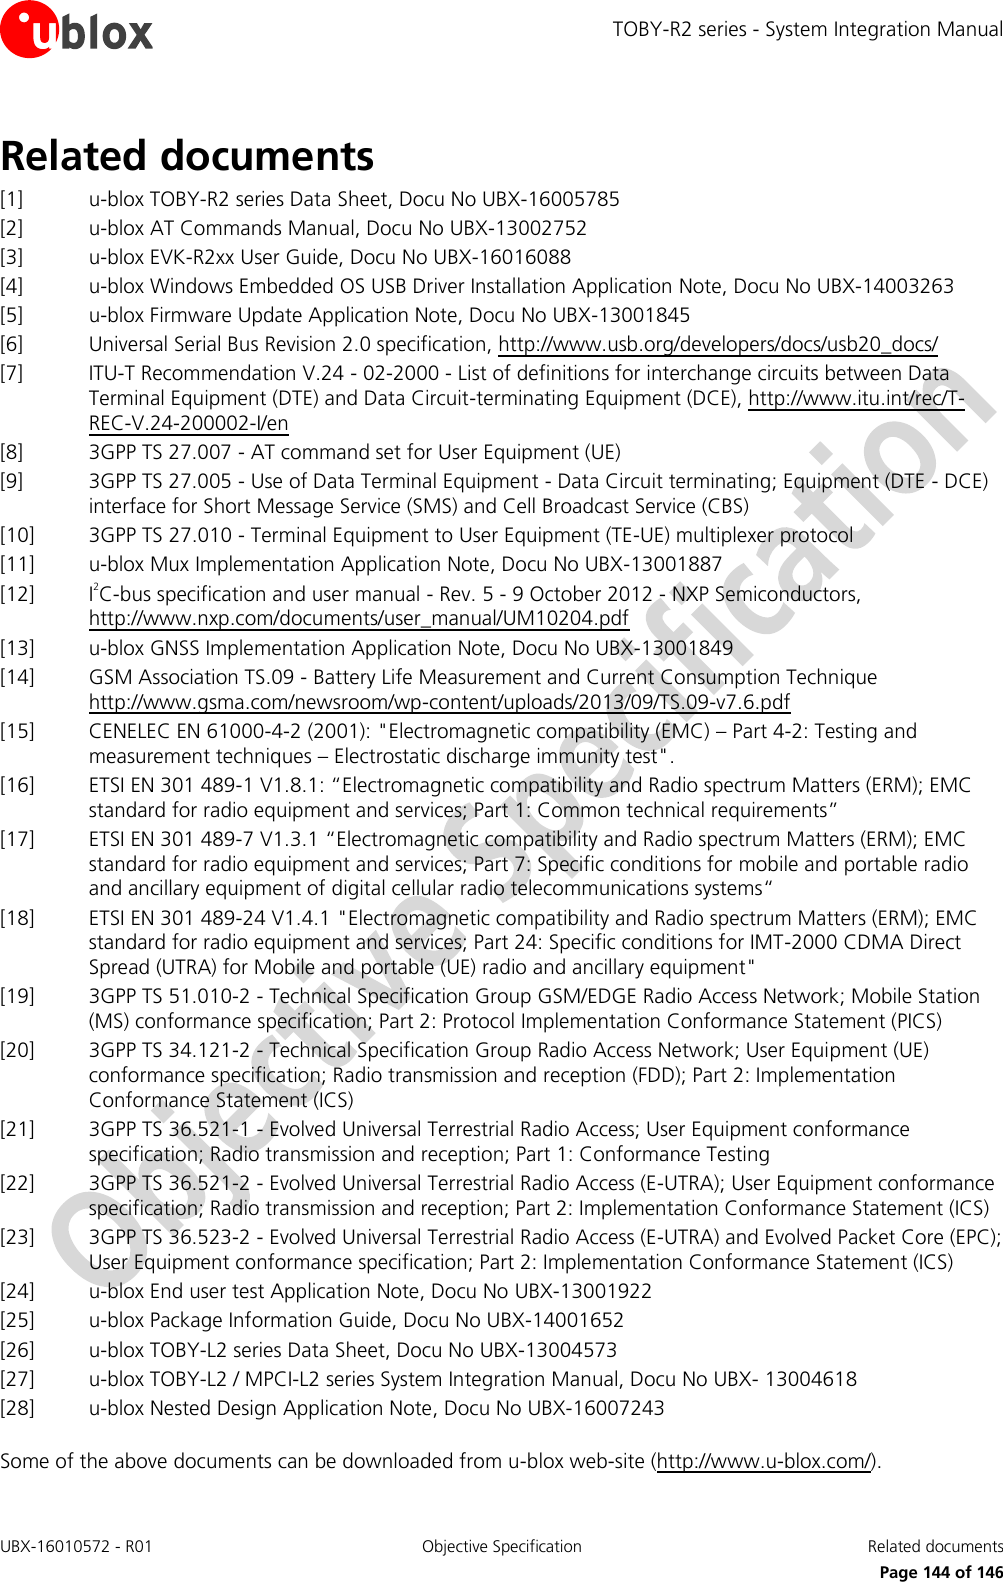 TOBY-R2 series - System Integration Manual UBX-16010572 - R01  Objective Specification  Related documents      Page 144 of 146 Related documents [1] u-blox TOBY-R2 series Data Sheet, Docu No UBX-16005785 [2] u-blox AT Commands Manual, Docu No UBX-13002752 [3] u-blox EVK-R2xx User Guide, Docu No UBX-16016088 [4] u-blox Windows Embedded OS USB Driver Installation Application Note, Docu No UBX-14003263 [5] u-blox Firmware Update Application Note, Docu No UBX-13001845 [6] Universal Serial Bus Revision 2.0 specification, http://www.usb.org/developers/docs/usb20_docs/  [7] ITU-T Recommendation V.24 - 02-2000 - List of definitions for interchange circuits between Data Terminal Equipment (DTE) and Data Circuit-terminating Equipment (DCE), http://www.itu.int/rec/T-REC-V.24-200002-I/en [8] 3GPP TS 27.007 - AT command set for User Equipment (UE)  [9] 3GPP TS 27.005 - Use of Data Terminal Equipment - Data Circuit terminating; Equipment (DTE - DCE) interface for Short Message Service (SMS) and Cell Broadcast Service (CBS)  [10] 3GPP TS 27.010 - Terminal Equipment to User Equipment (TE-UE) multiplexer protocol [11] u-blox Mux Implementation Application Note, Docu No UBX-13001887 [12] I2C-bus specification and user manual - Rev. 5 - 9 October 2012 - NXP Semiconductors, http://www.nxp.com/documents/user_manual/UM10204.pdf [13] u-blox GNSS Implementation Application Note, Docu No UBX-13001849  [14] GSM Association TS.09 - Battery Life Measurement and Current Consumption Technique http://www.gsma.com/newsroom/wp-content/uploads/2013/09/TS.09-v7.6.pdf  [15] CENELEC EN 61000-4-2 (2001): &quot;Electromagnetic compatibility (EMC) – Part 4-2: Testing and measurement techniques – Electrostatic discharge immunity test&quot;. [16] ETSI EN 301 489-1 V1.8.1: “Electromagnetic compatibility and Radio spectrum Matters (ERM); EMC standard for radio equipment and services; Part 1: Common technical requirements” [17] ETSI EN 301 489-7 V1.3.1 “Electromagnetic compatibility and Radio spectrum Matters (ERM); EMC standard for radio equipment and services; Part 7: Specific conditions for mobile and portable radio and ancillary equipment of digital cellular radio telecommunications systems“ [18] ETSI EN 301 489-24 V1.4.1 &quot;Electromagnetic compatibility and Radio spectrum Matters (ERM); EMC standard for radio equipment and services; Part 24: Specific conditions for IMT-2000 CDMA Direct Spread (UTRA) for Mobile and portable (UE) radio and ancillary equipment&quot; [19] 3GPP TS 51.010-2 - Technical Specification Group GSM/EDGE Radio Access Network; Mobile Station (MS) conformance specification; Part 2: Protocol Implementation Conformance Statement (PICS) [20] 3GPP TS 34.121-2 - Technical Specification Group Radio Access Network; User Equipment (UE) conformance specification; Radio transmission and reception (FDD); Part 2: Implementation Conformance Statement (ICS) [21] 3GPP TS 36.521-1 - Evolved Universal Terrestrial Radio Access; User Equipment conformance specification; Radio transmission and reception; Part 1: Conformance Testing [22] 3GPP TS 36.521-2 - Evolved Universal Terrestrial Radio Access (E-UTRA); User Equipment conformance specification; Radio transmission and reception; Part 2: Implementation Conformance Statement (ICS) [23] 3GPP TS 36.523-2 - Evolved Universal Terrestrial Radio Access (E-UTRA) and Evolved Packet Core (EPC); User Equipment conformance specification; Part 2: Implementation Conformance Statement (ICS) [24] u-blox End user test Application Note, Docu No UBX-13001922 [25] u-blox Package Information Guide, Docu No UBX-14001652 [26] u-blox TOBY-L2 series Data Sheet, Docu No UBX-13004573 [27] u-blox TOBY-L2 / MPCI-L2 series System Integration Manual, Docu No UBX- 13004618 [28] u-blox Nested Design Application Note, Docu No UBX-16007243  Some of the above documents can be downloaded from u-blox web-site (http://www.u-blox.com/). 